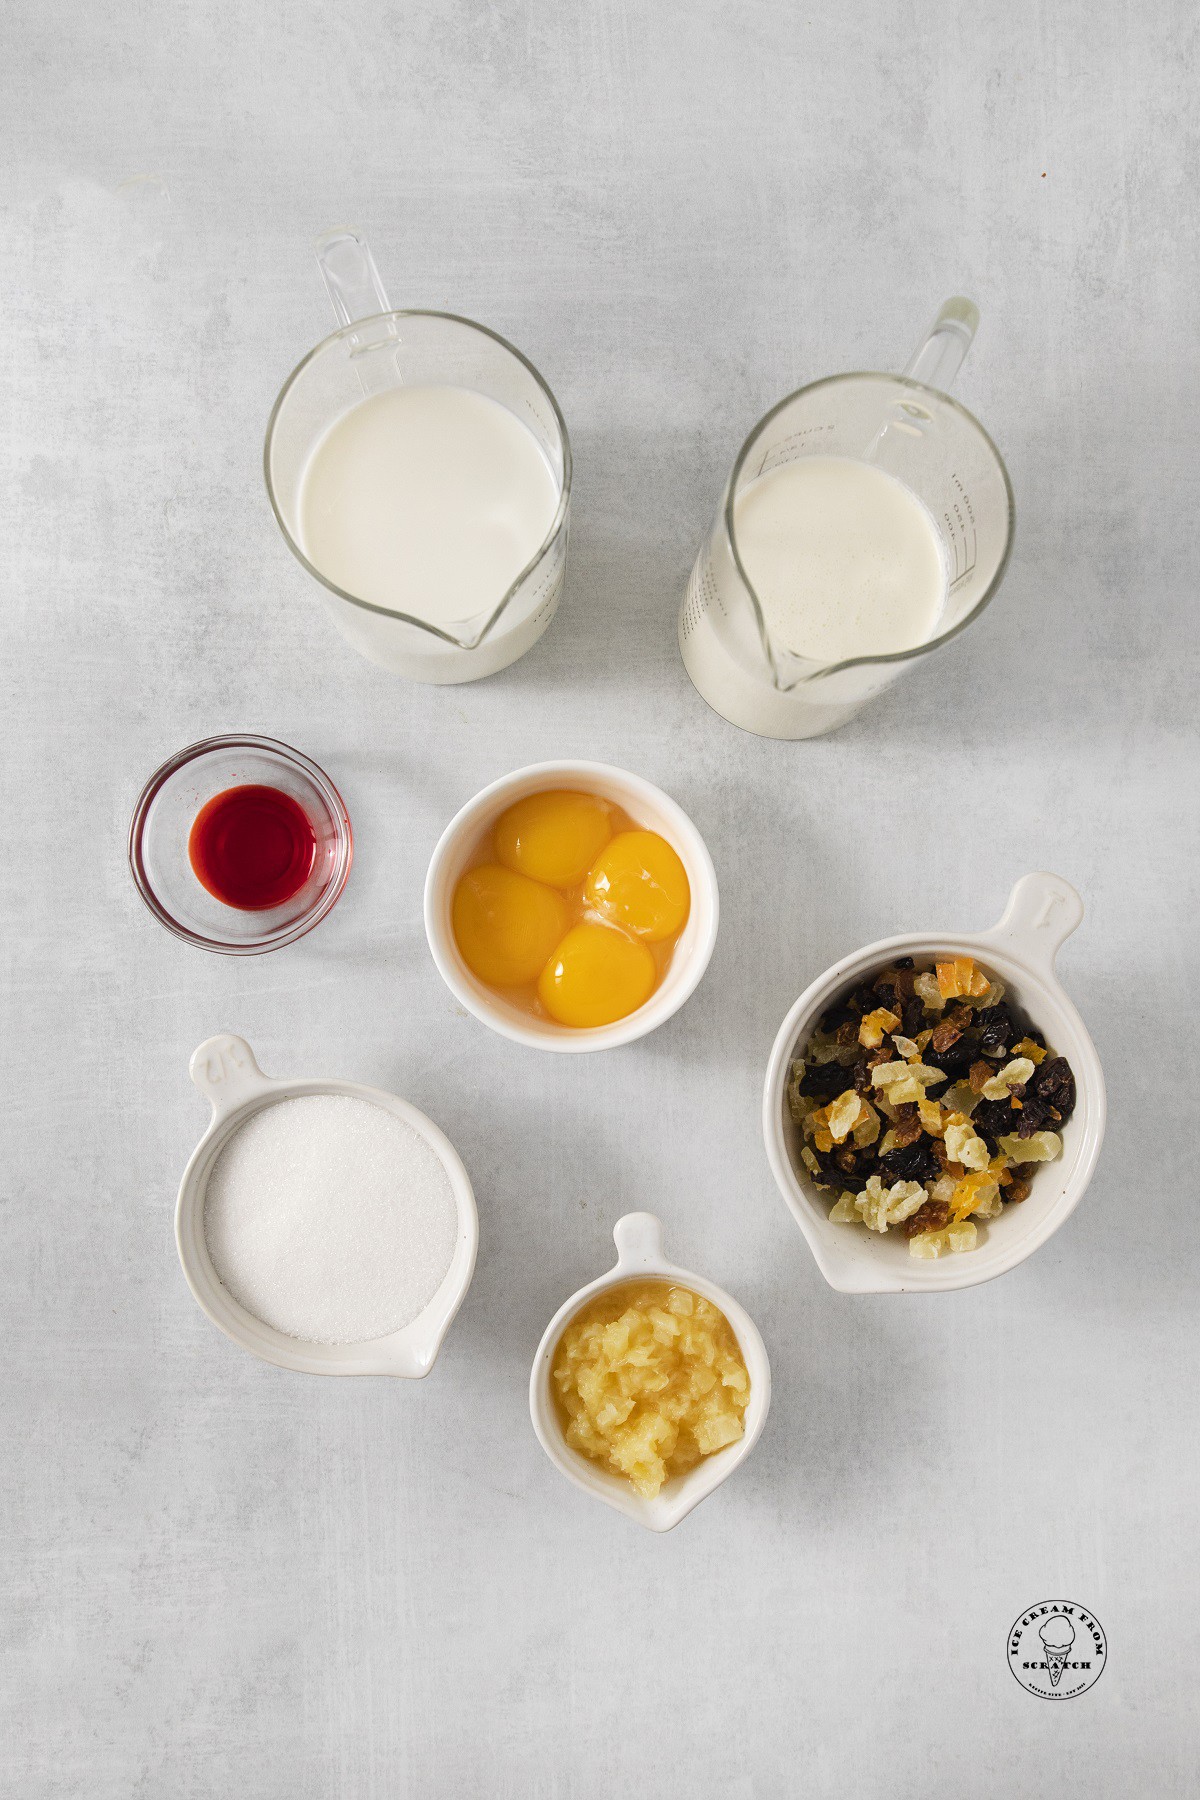 The ingredients needed to make a french style tutti frutti ice cream recipe, with dried fruit, egg yolks, sugar, and milk, all measured out into individual containers.